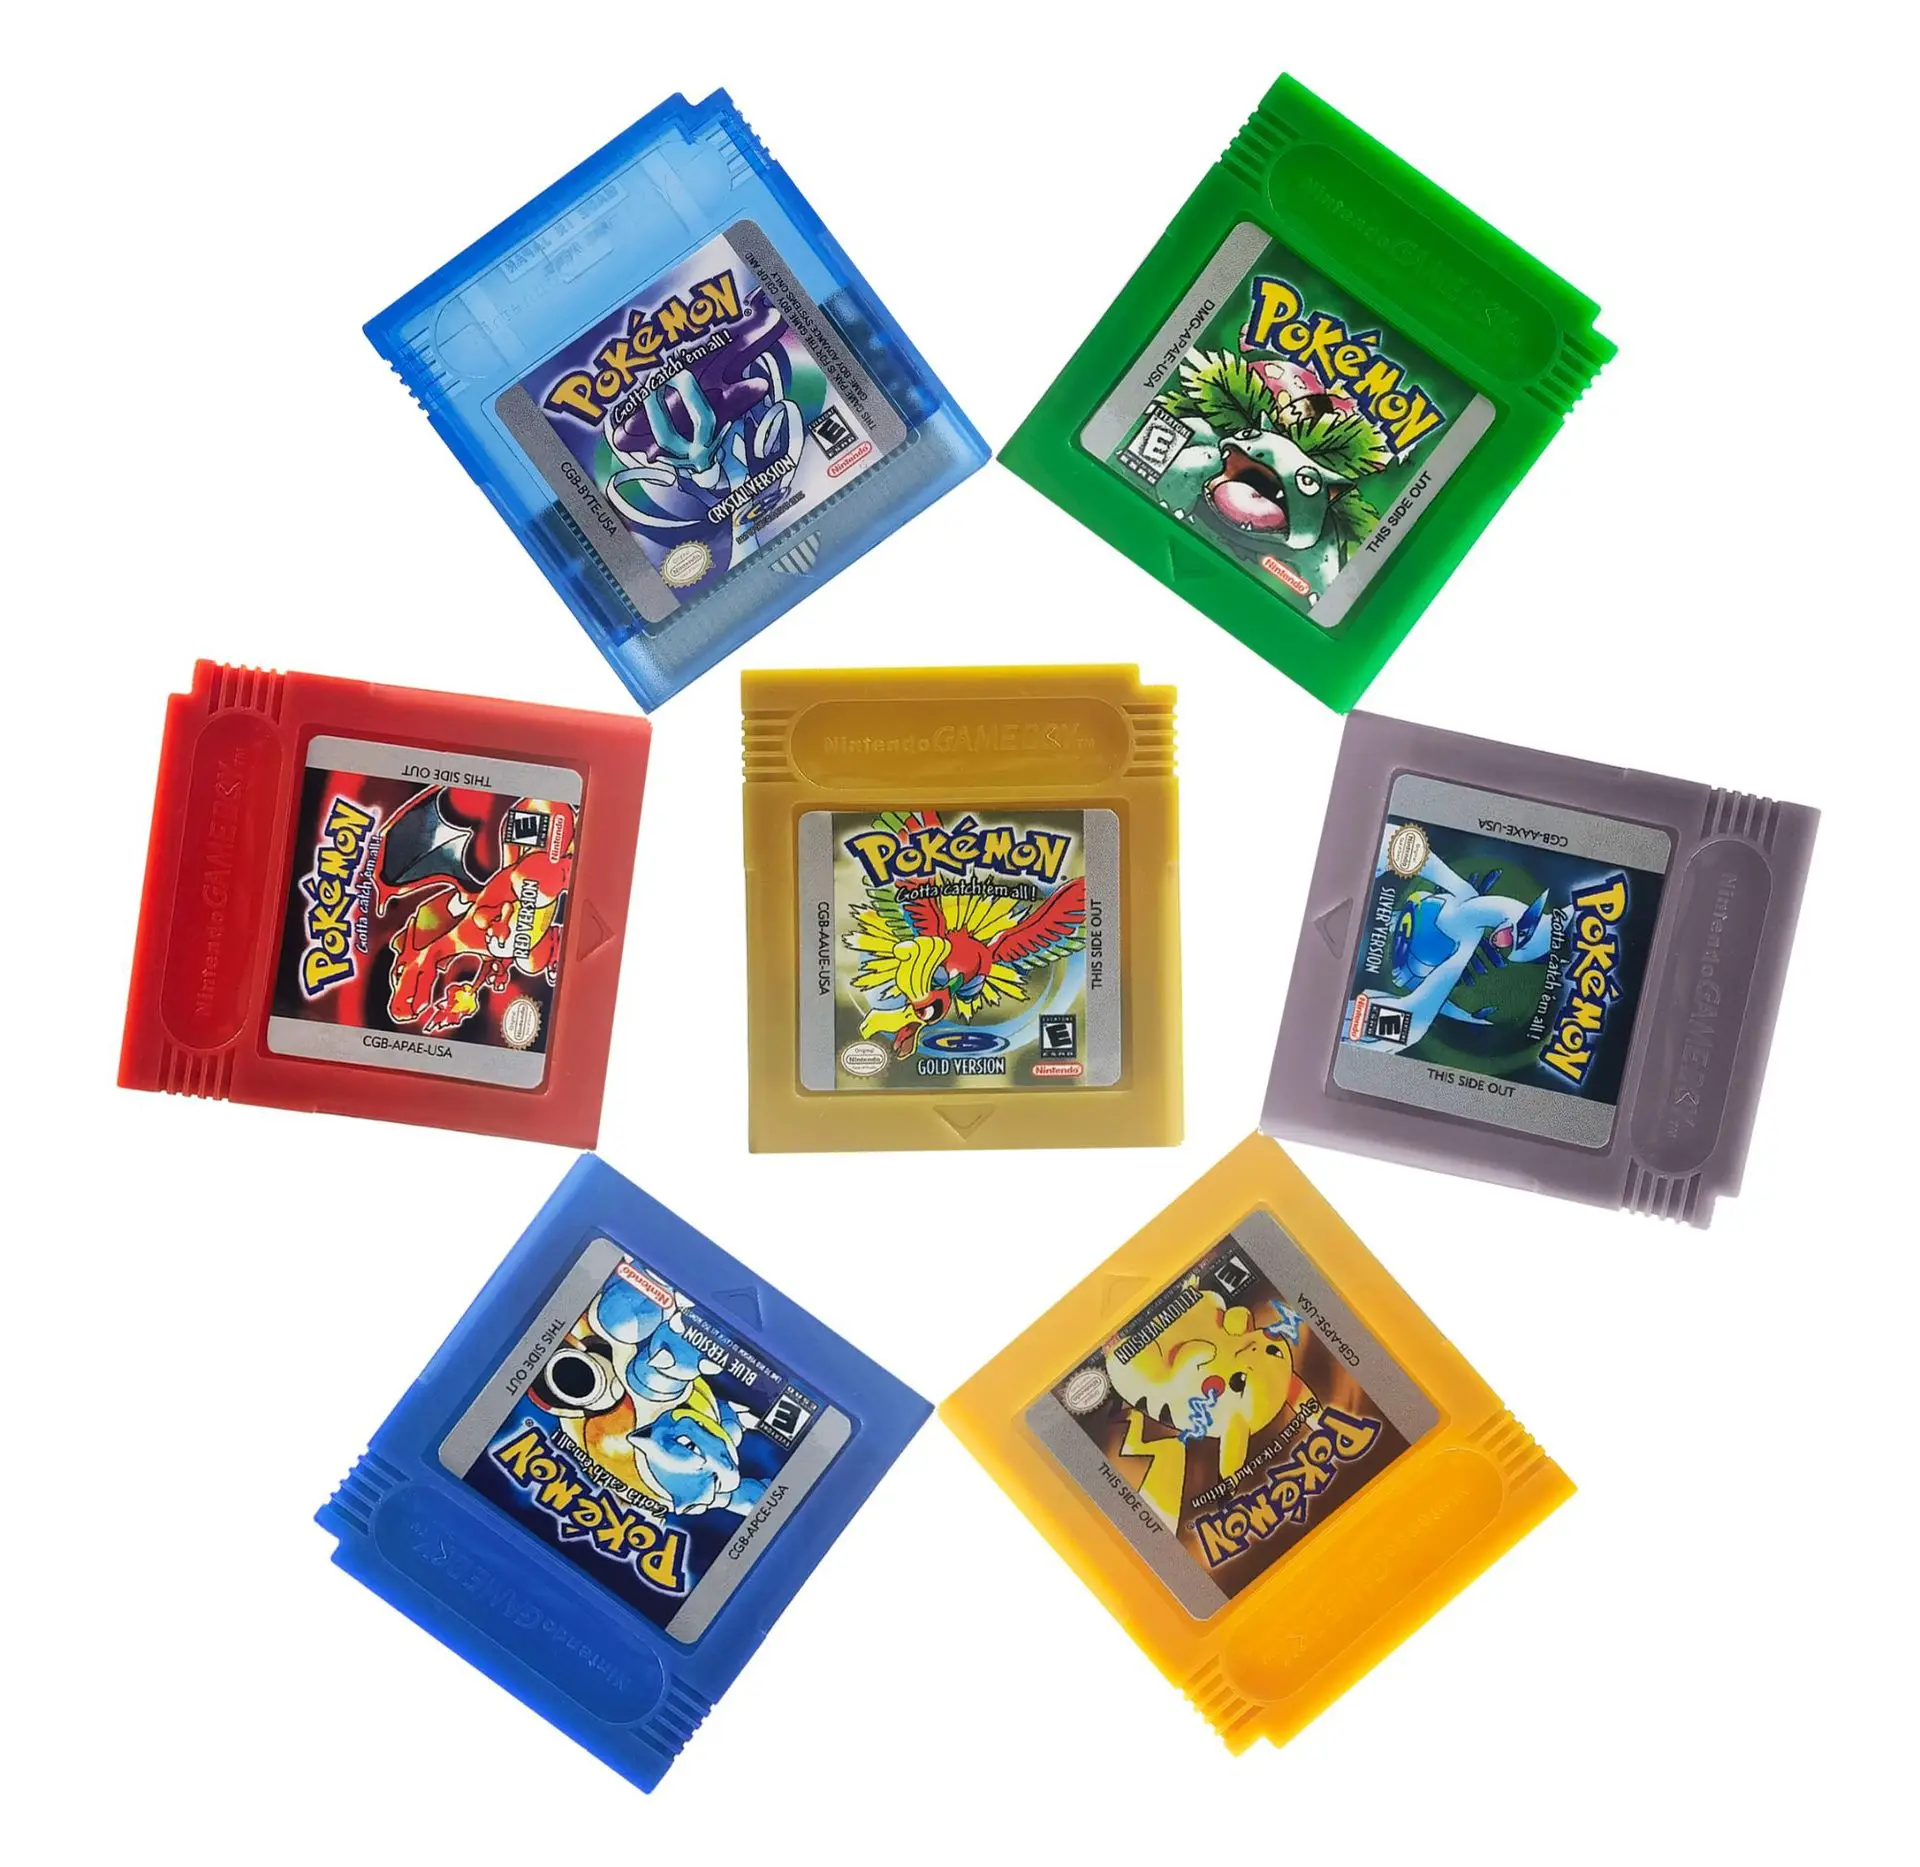 

Pokemon GB GBC Card 16 Bit Video Game Cartridge Console Card Gameboy Color Classic Game Collect Colorful English Version Gifts